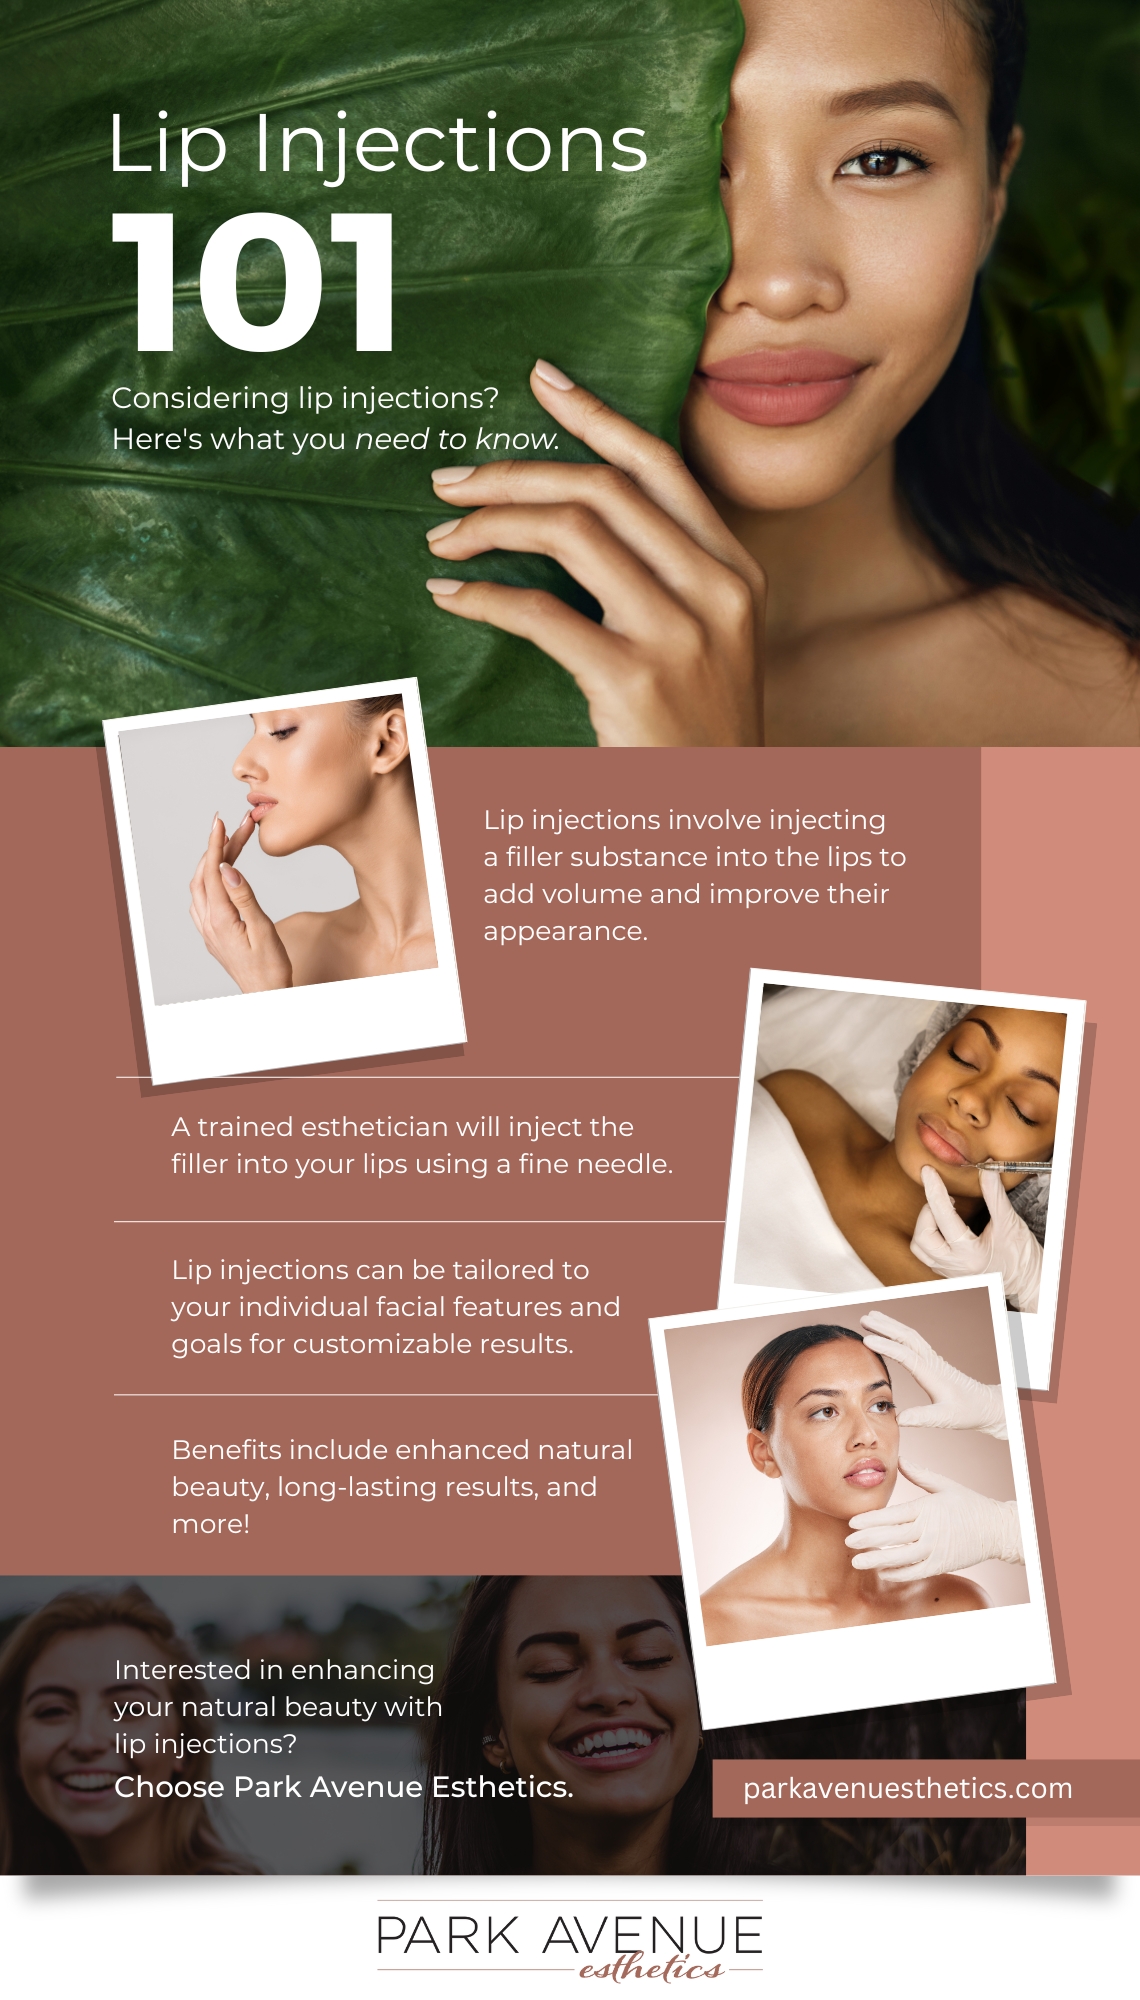 Lip injections 101 infographic